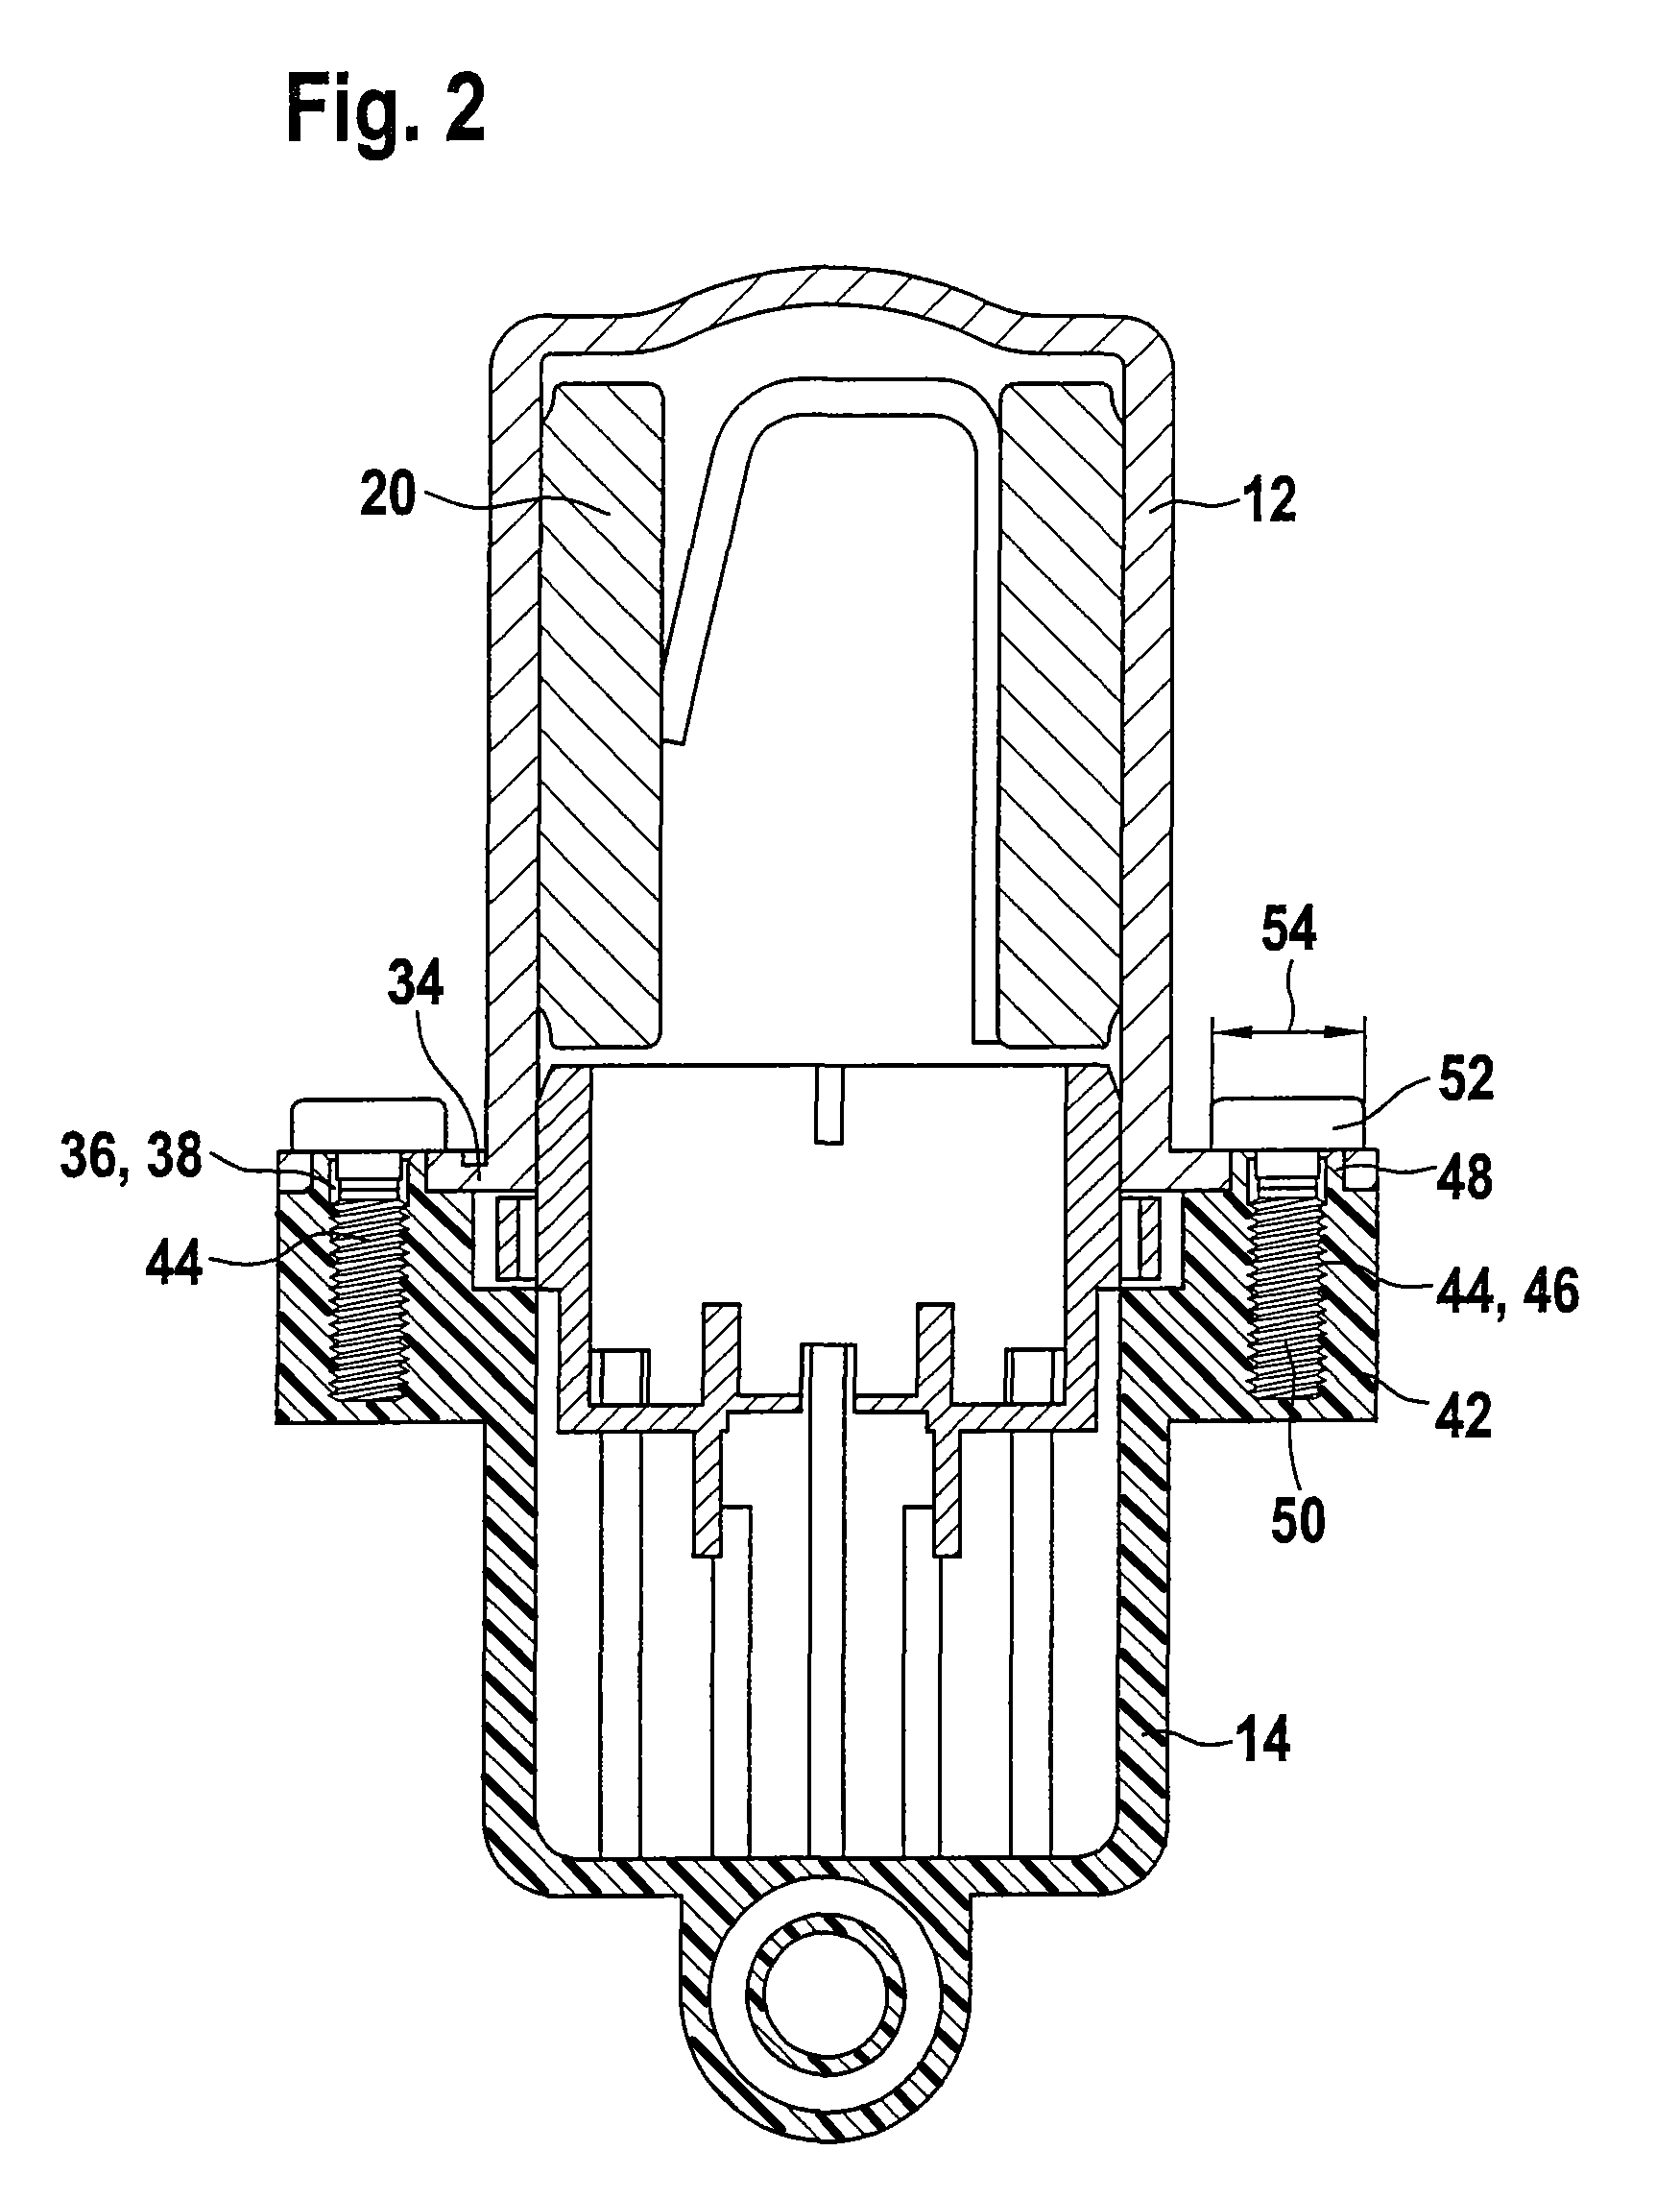 Drive unit for actuators in a motor vehicle